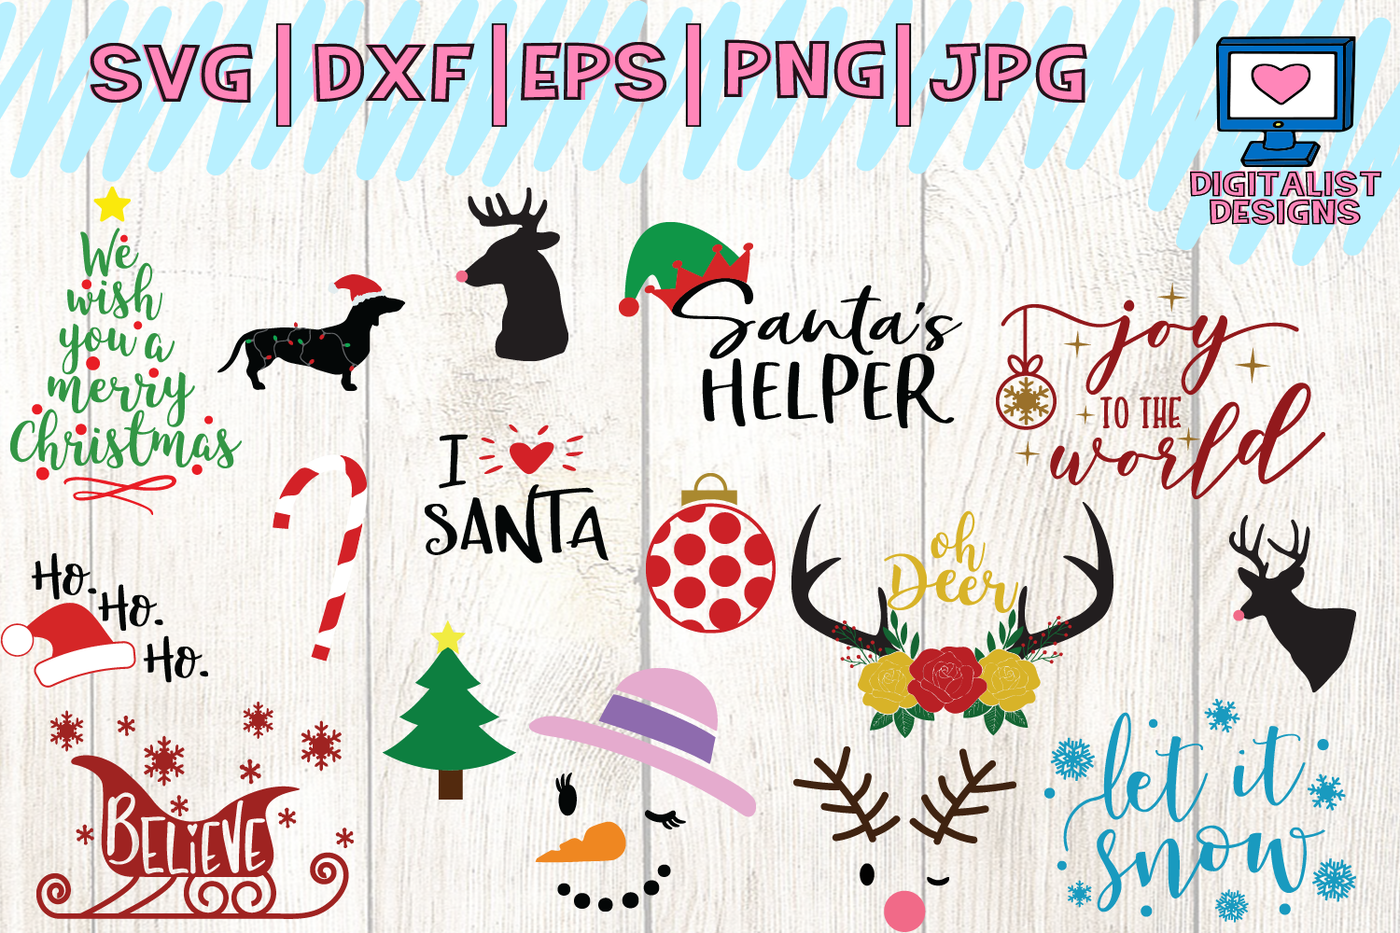 Christmas In July - Download Svg Free Vector Art